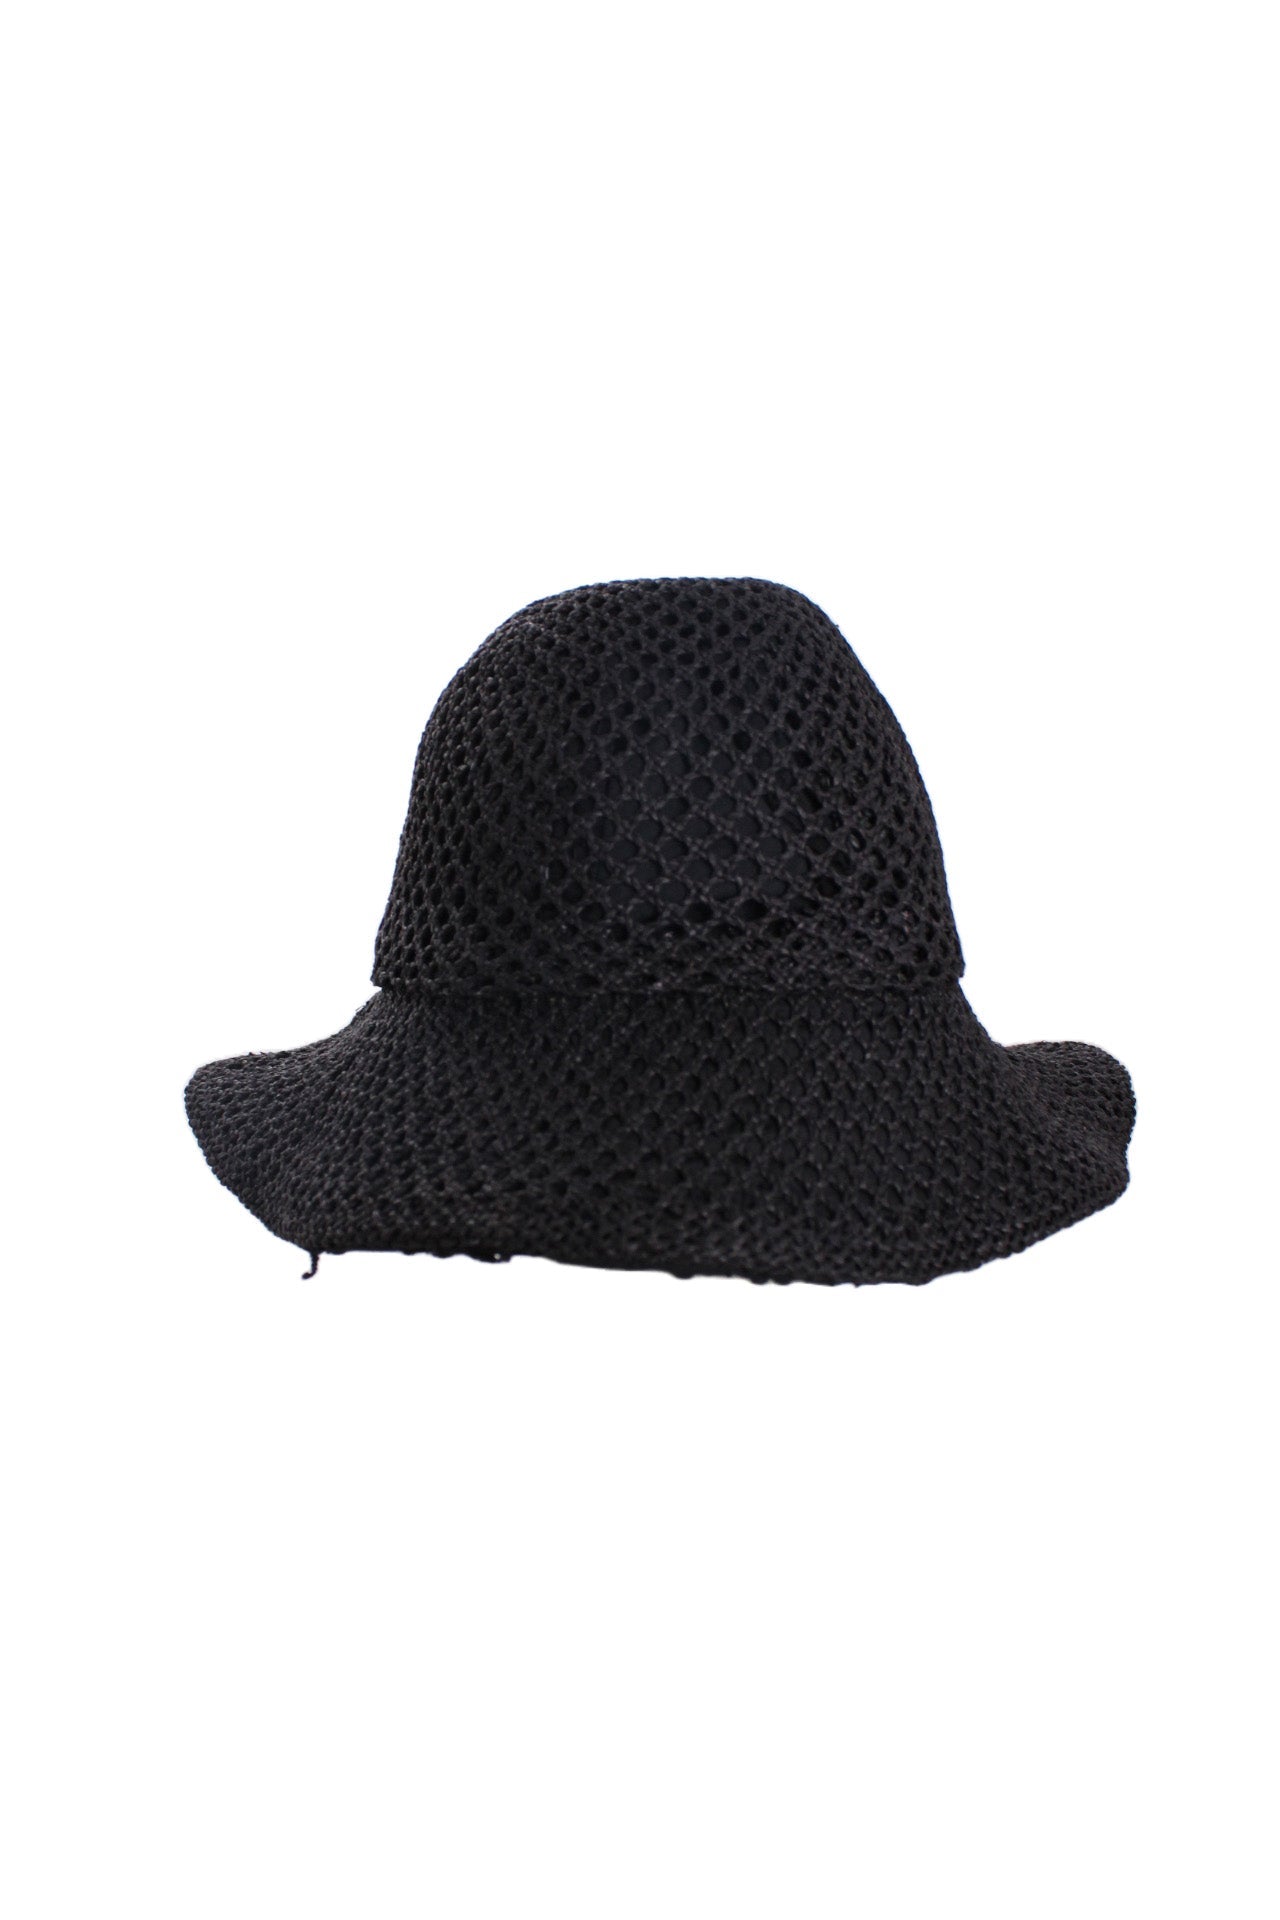 back of standing hat